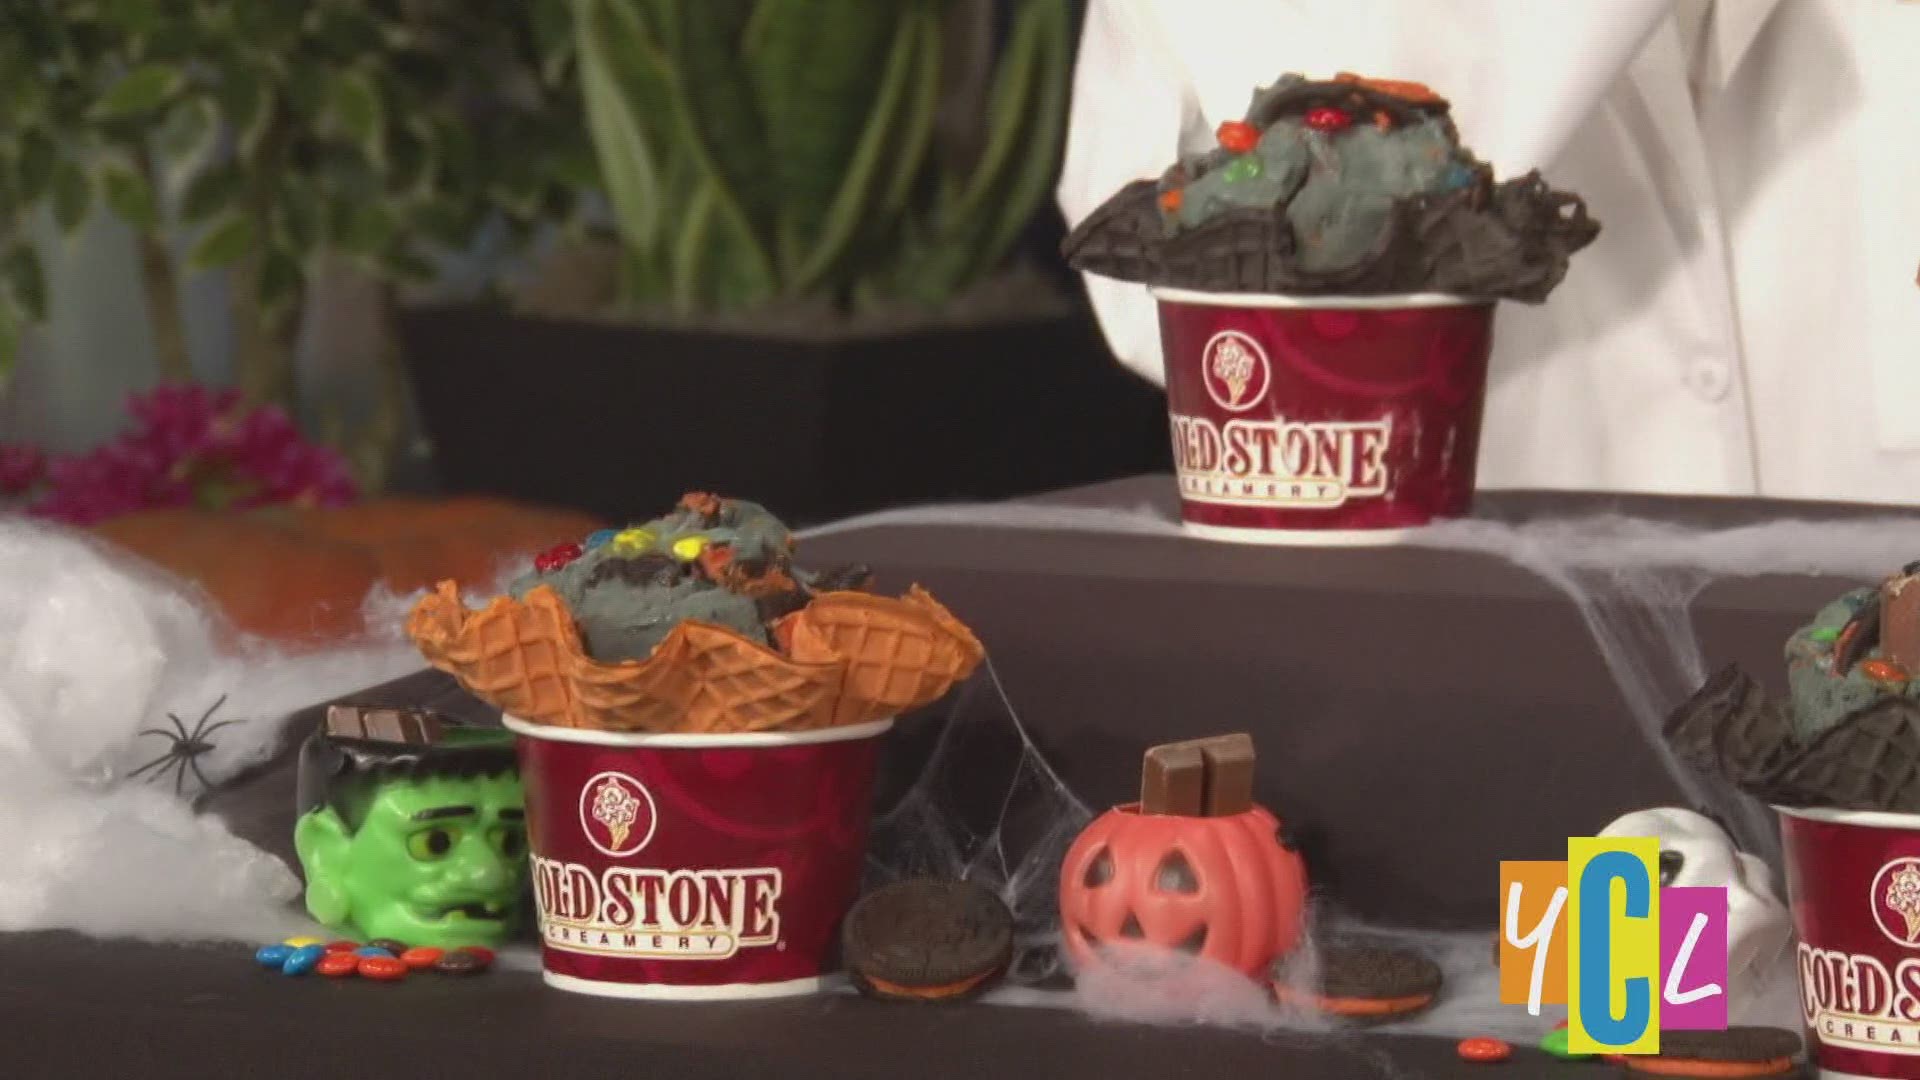 Cold Stone Creamery introduces their new boo-licious treat just in time for Halloween! This segment was paid for by Cold Stone Creamery.